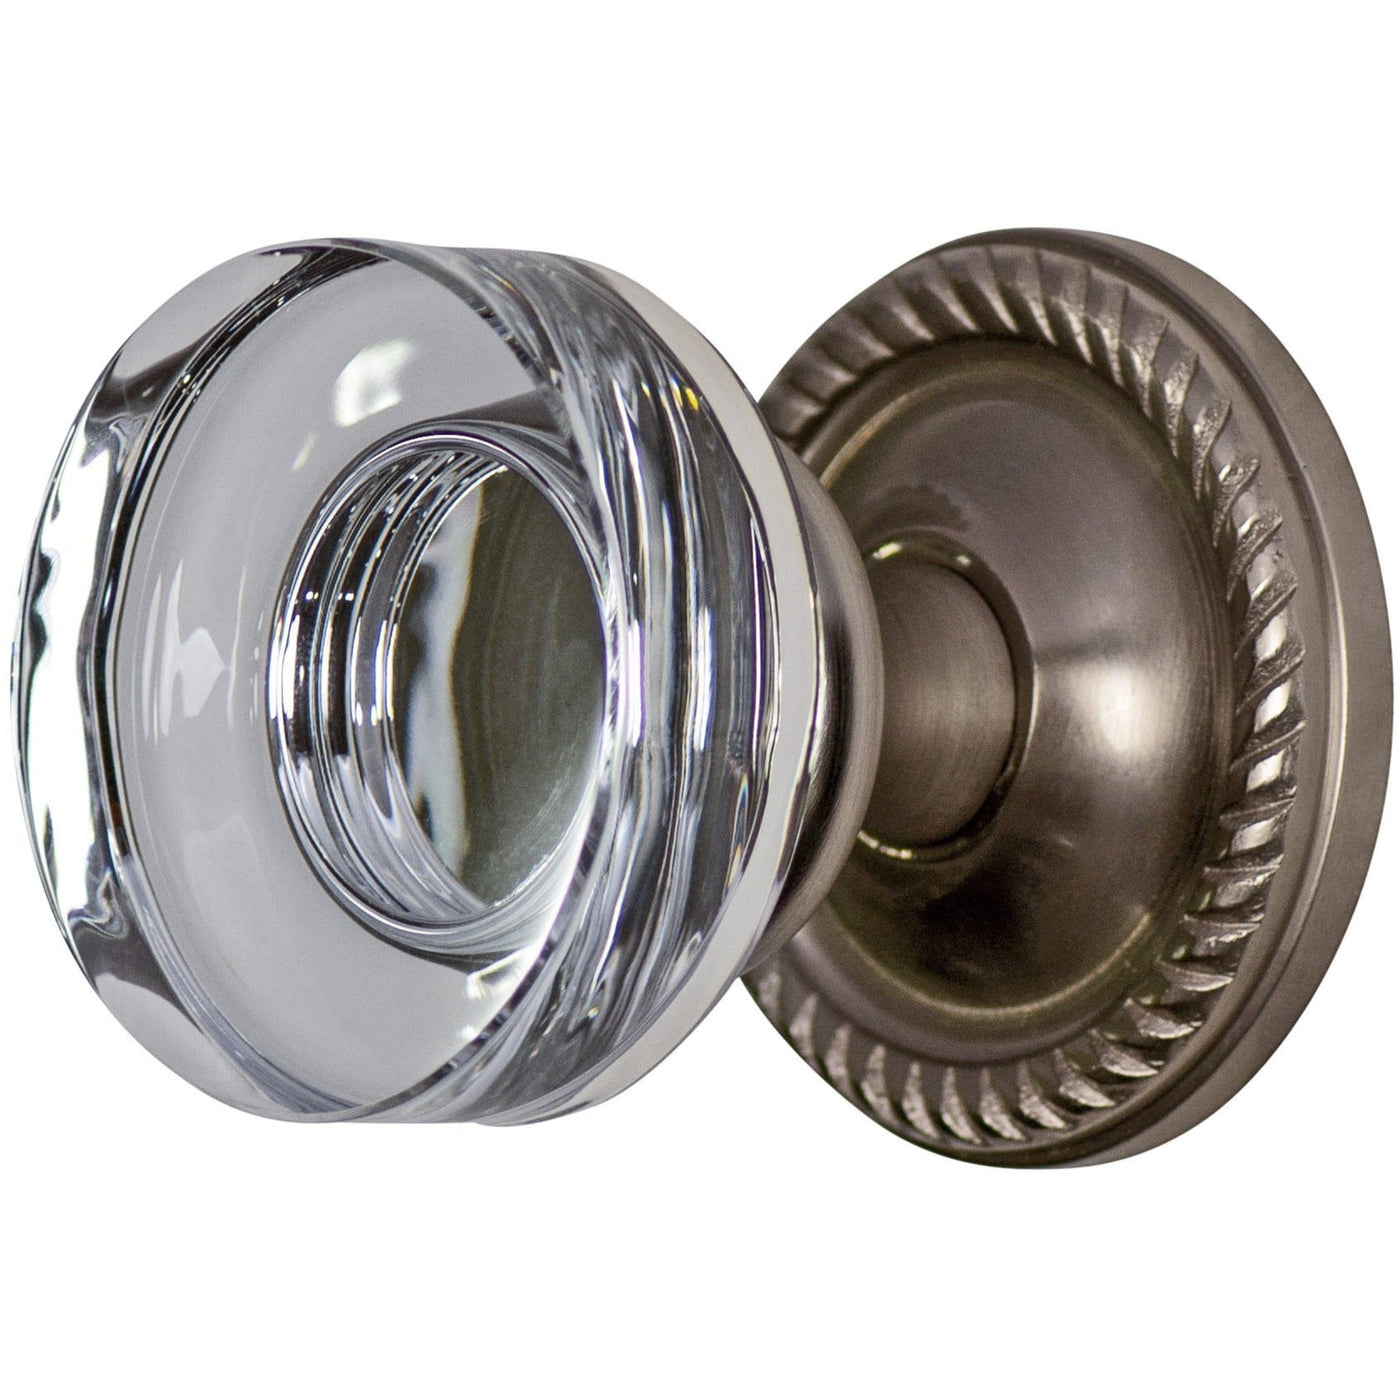 Crystal Clear Disc Door Knob Set with Georgian Roped Rosette (Several Finishes Available)